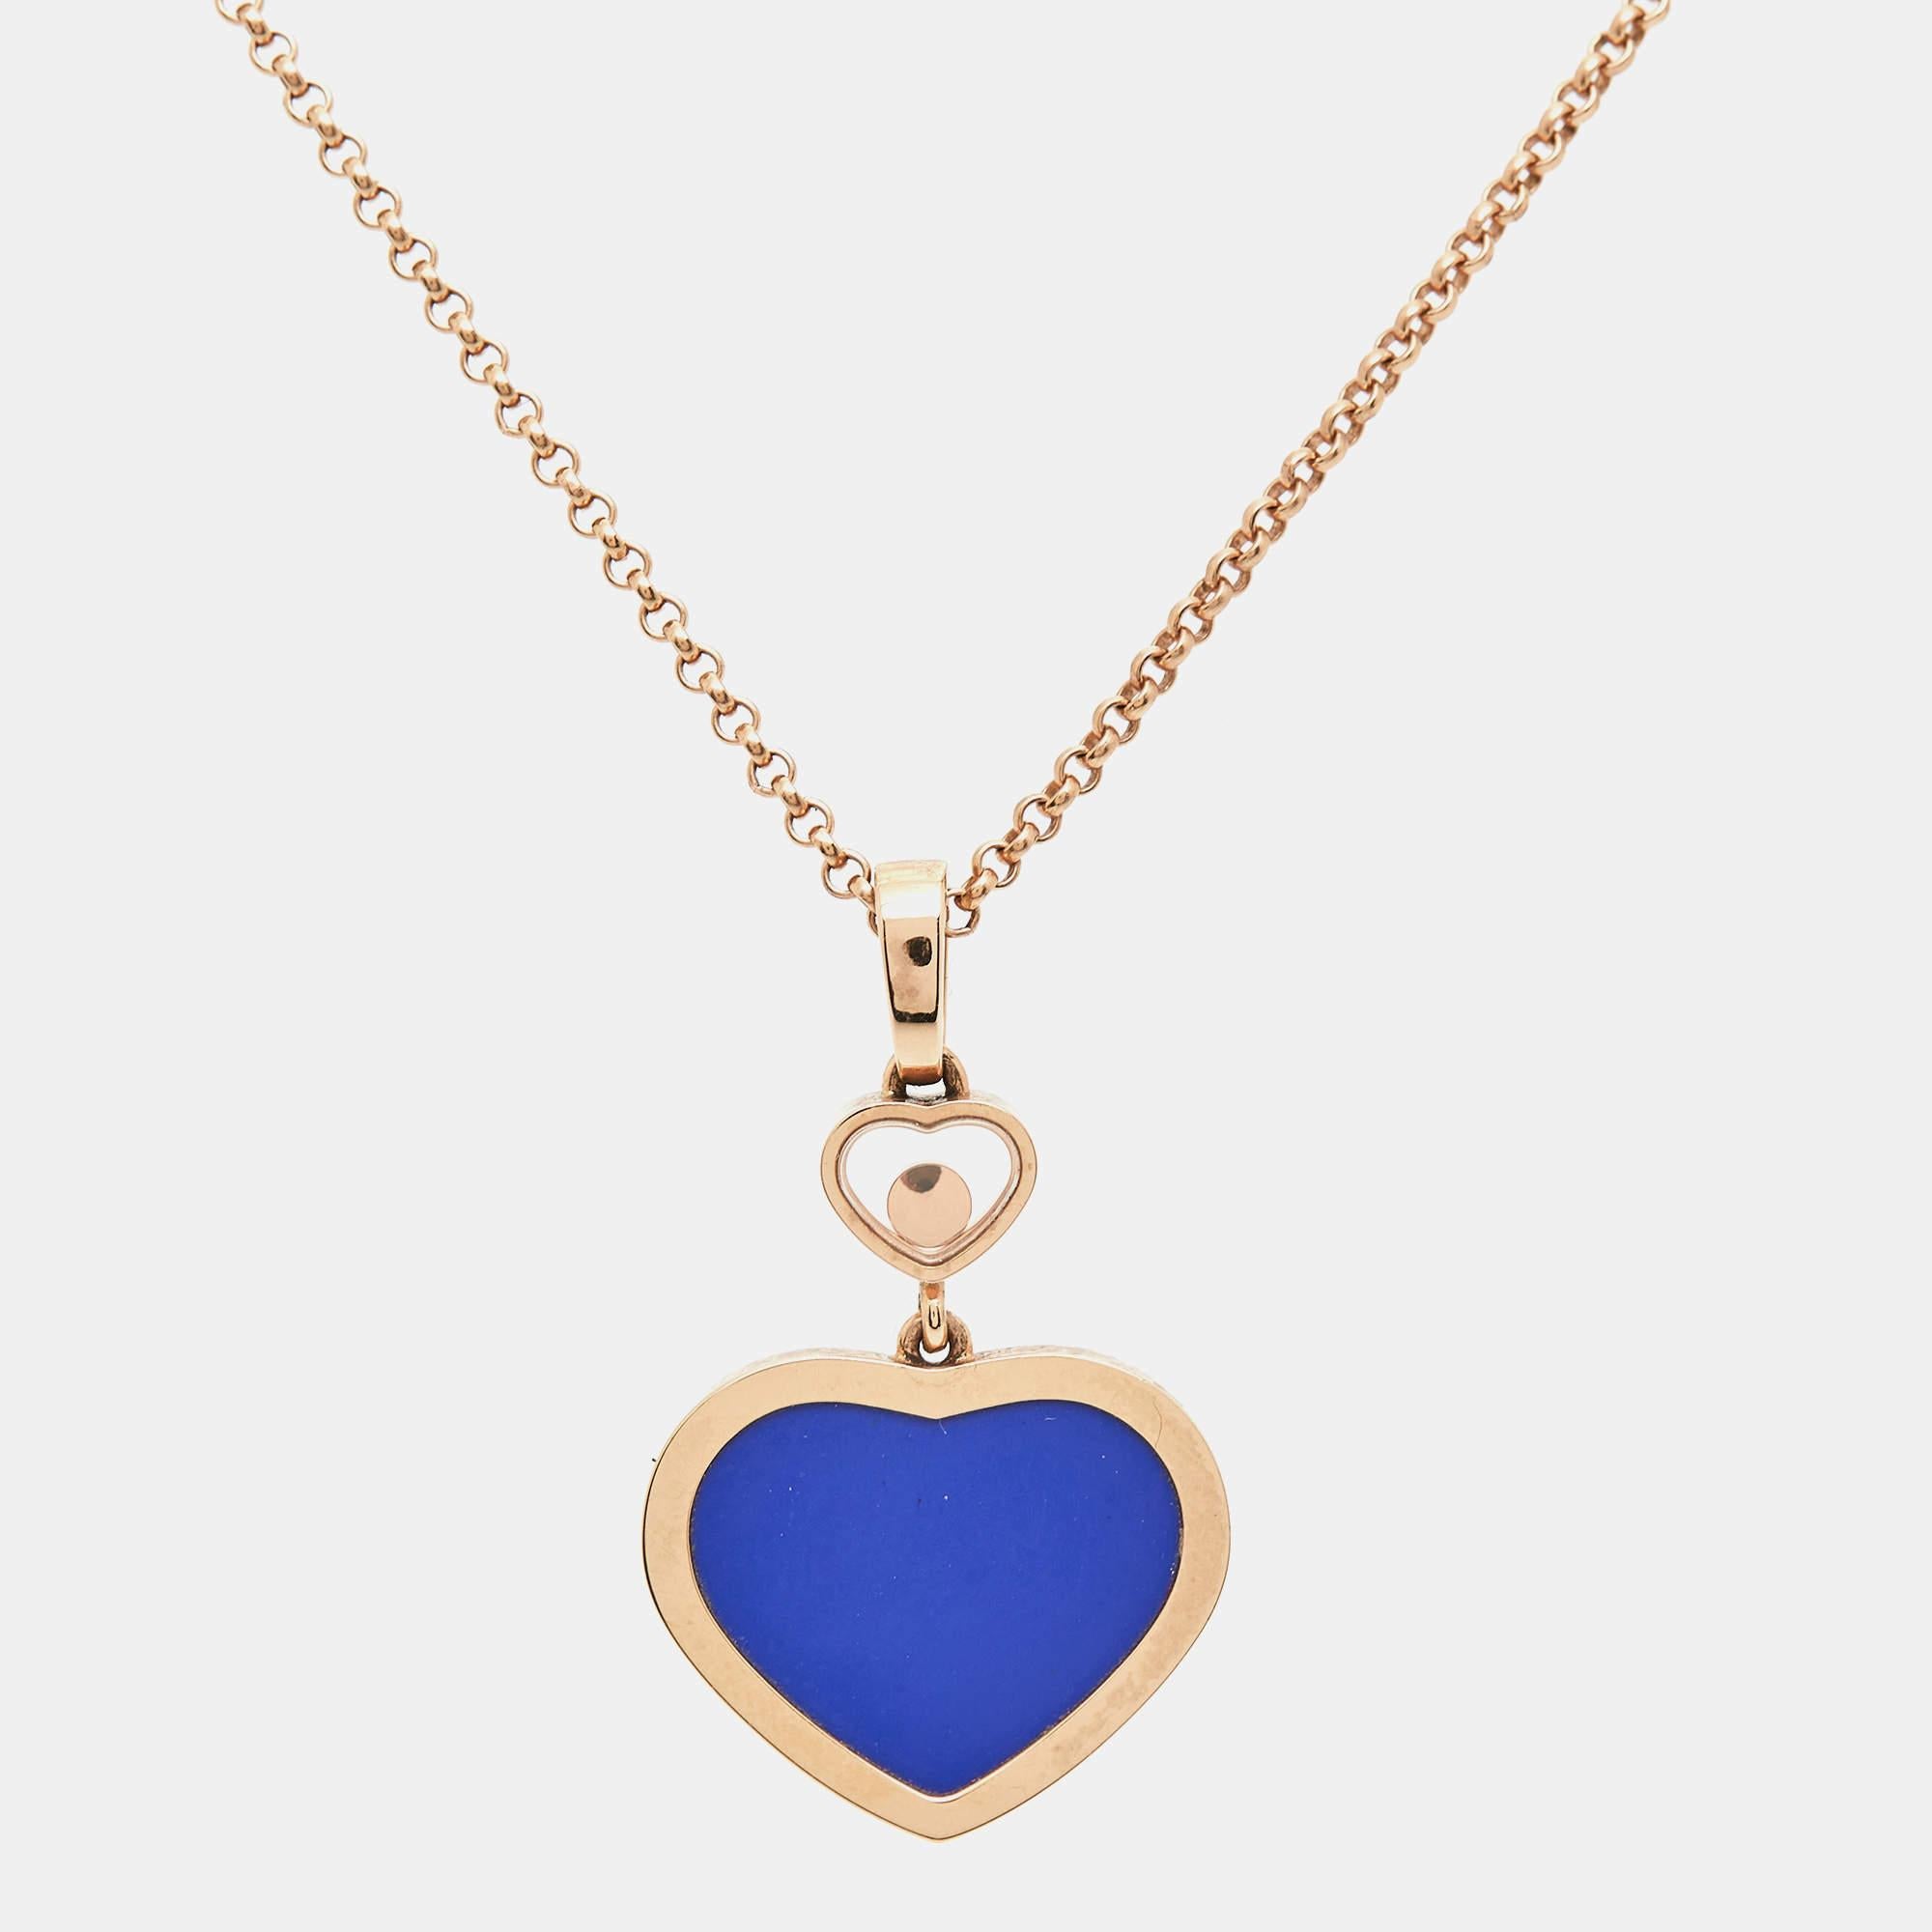 One look at this wondrous necklace from Chopard and our hearts flutter. It is from their Happy Hearts collection and has been created from 18k rose gold to shine. The chain holds two hearts - the larger one is inlaid with a blue stone and the